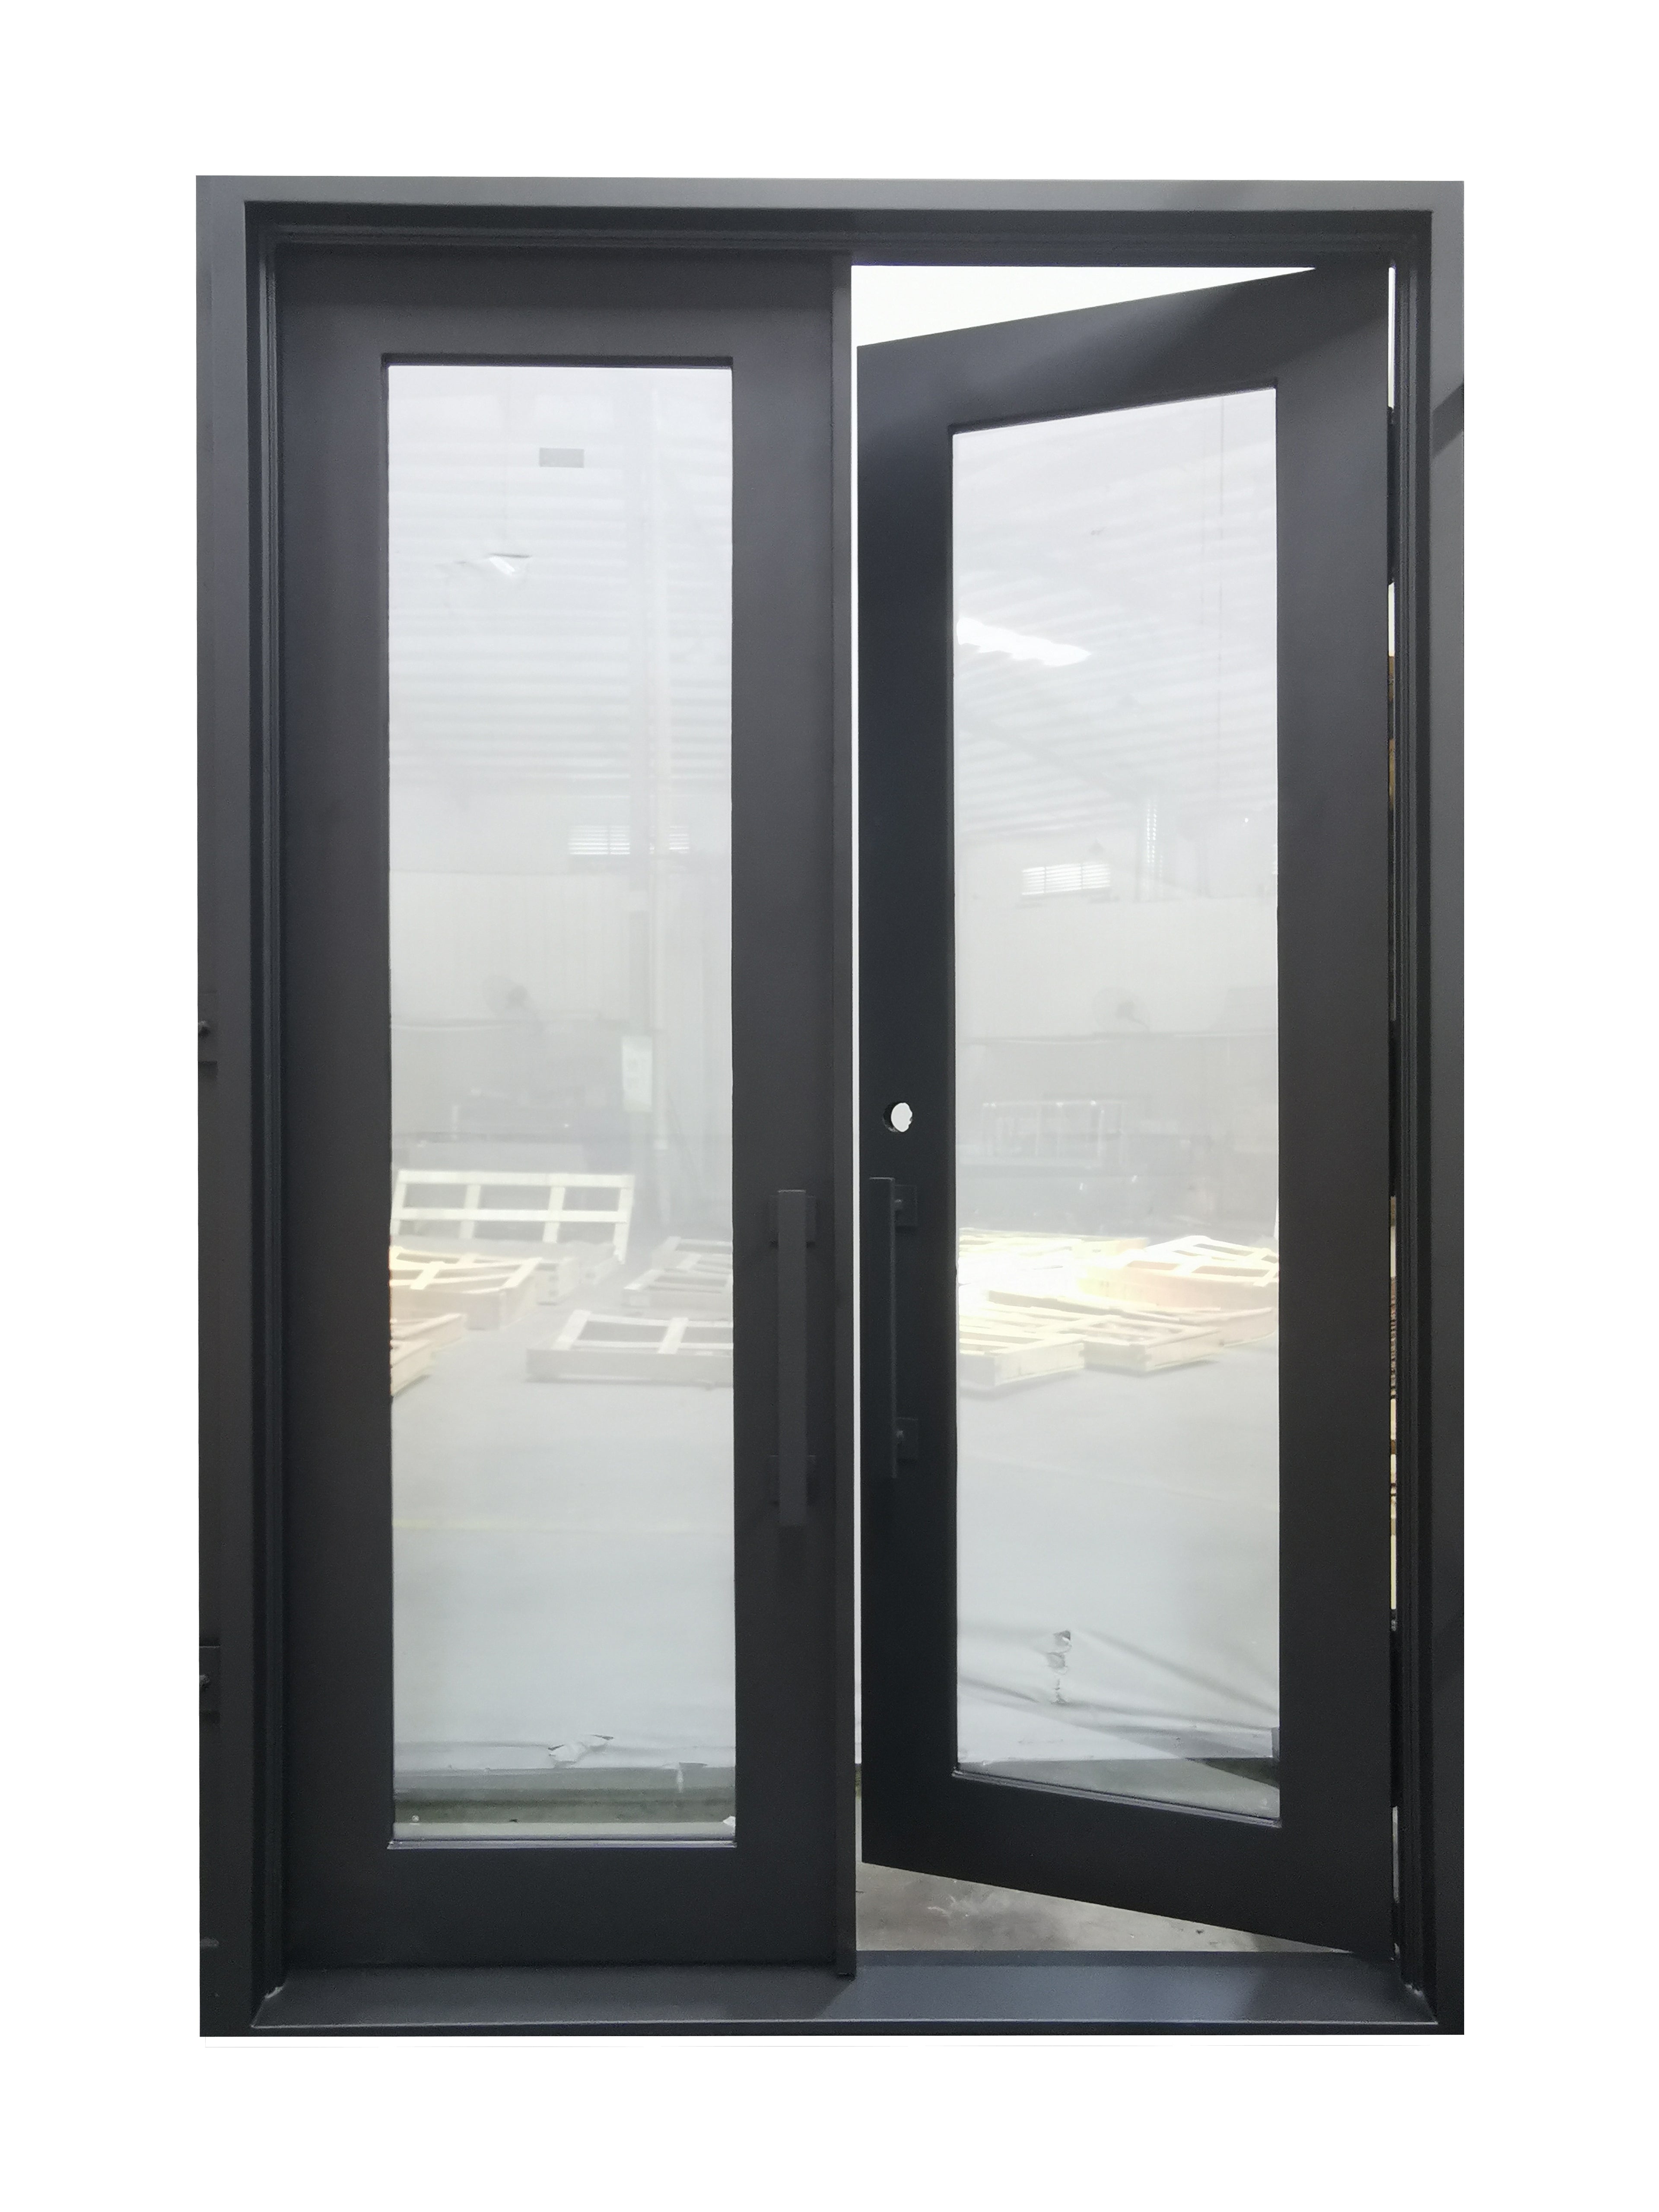 Acton Model Double Front Entry Iron Door With Tempered Clear Low E Glass Matt Black Finish